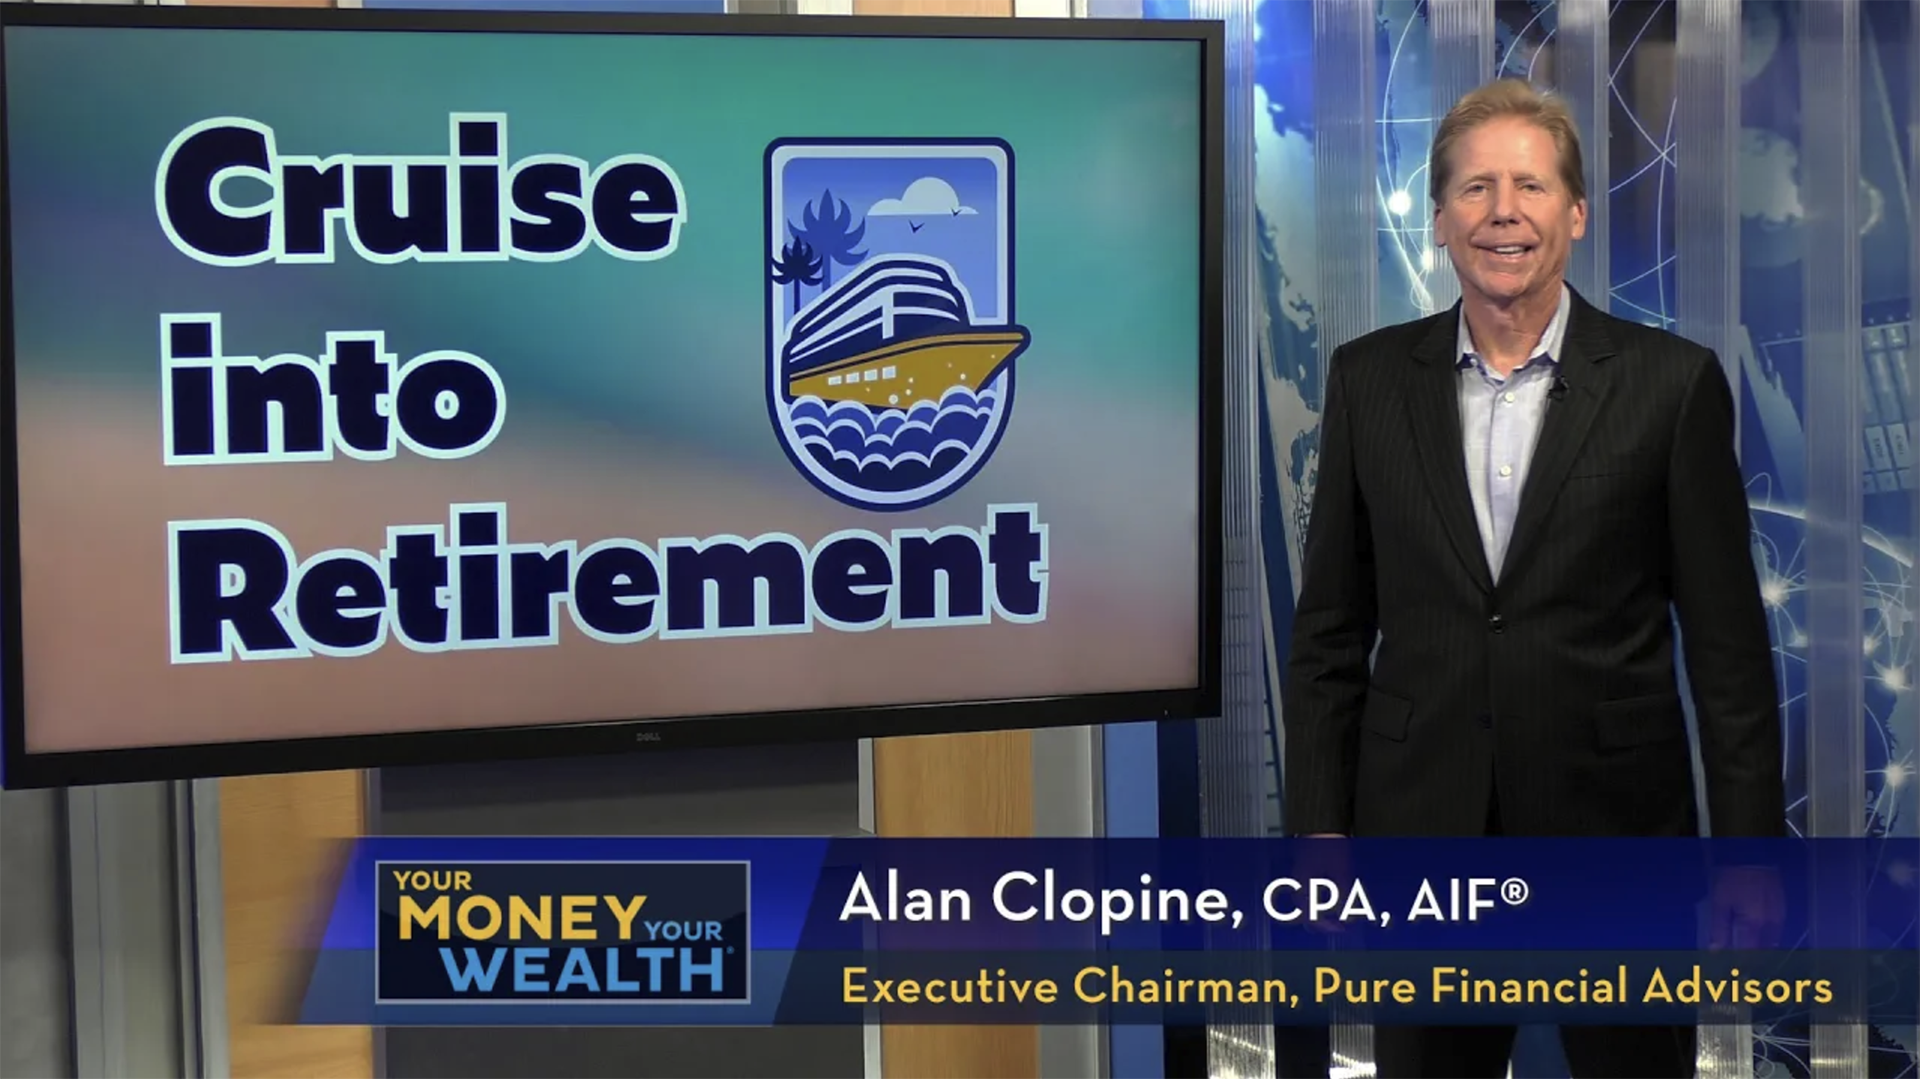 How to Cruise Into Your Retirement - Your Money, Your Wealth® TV - S9 | E11